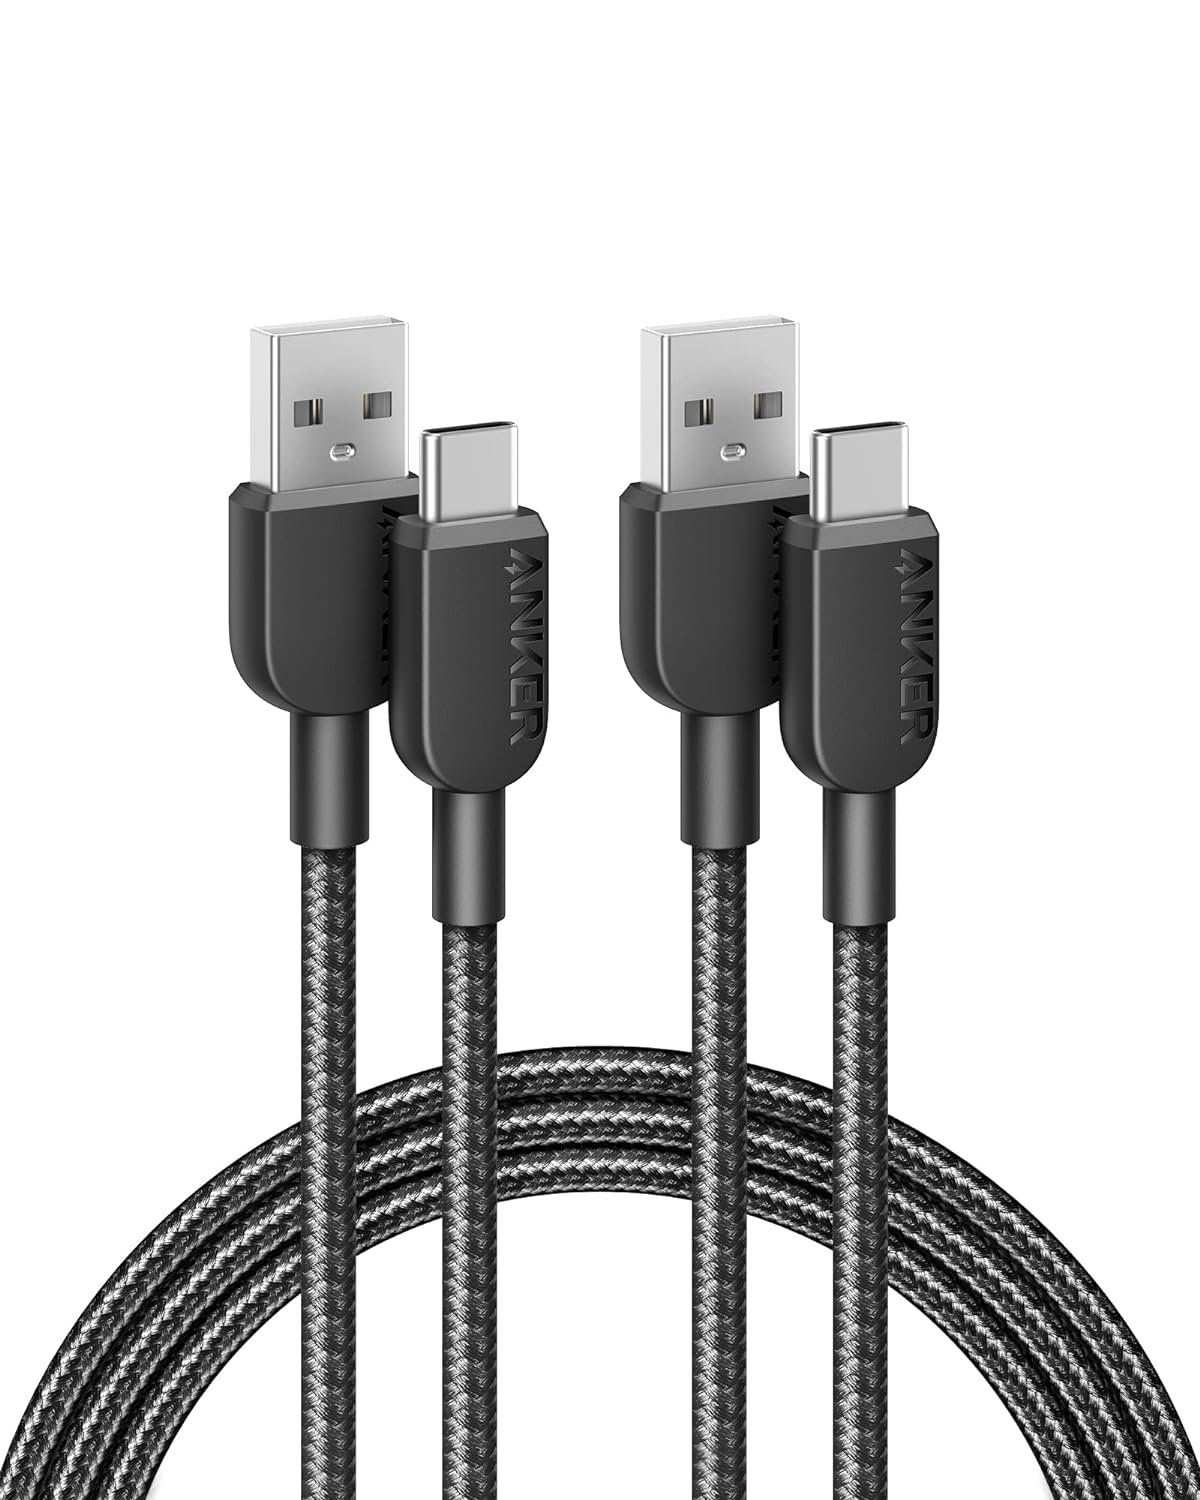 Anker USB C Charger Cable [2 Pack, 6ft], 310 Type C Charger Cable Fast Charging: A Comprehensive Review